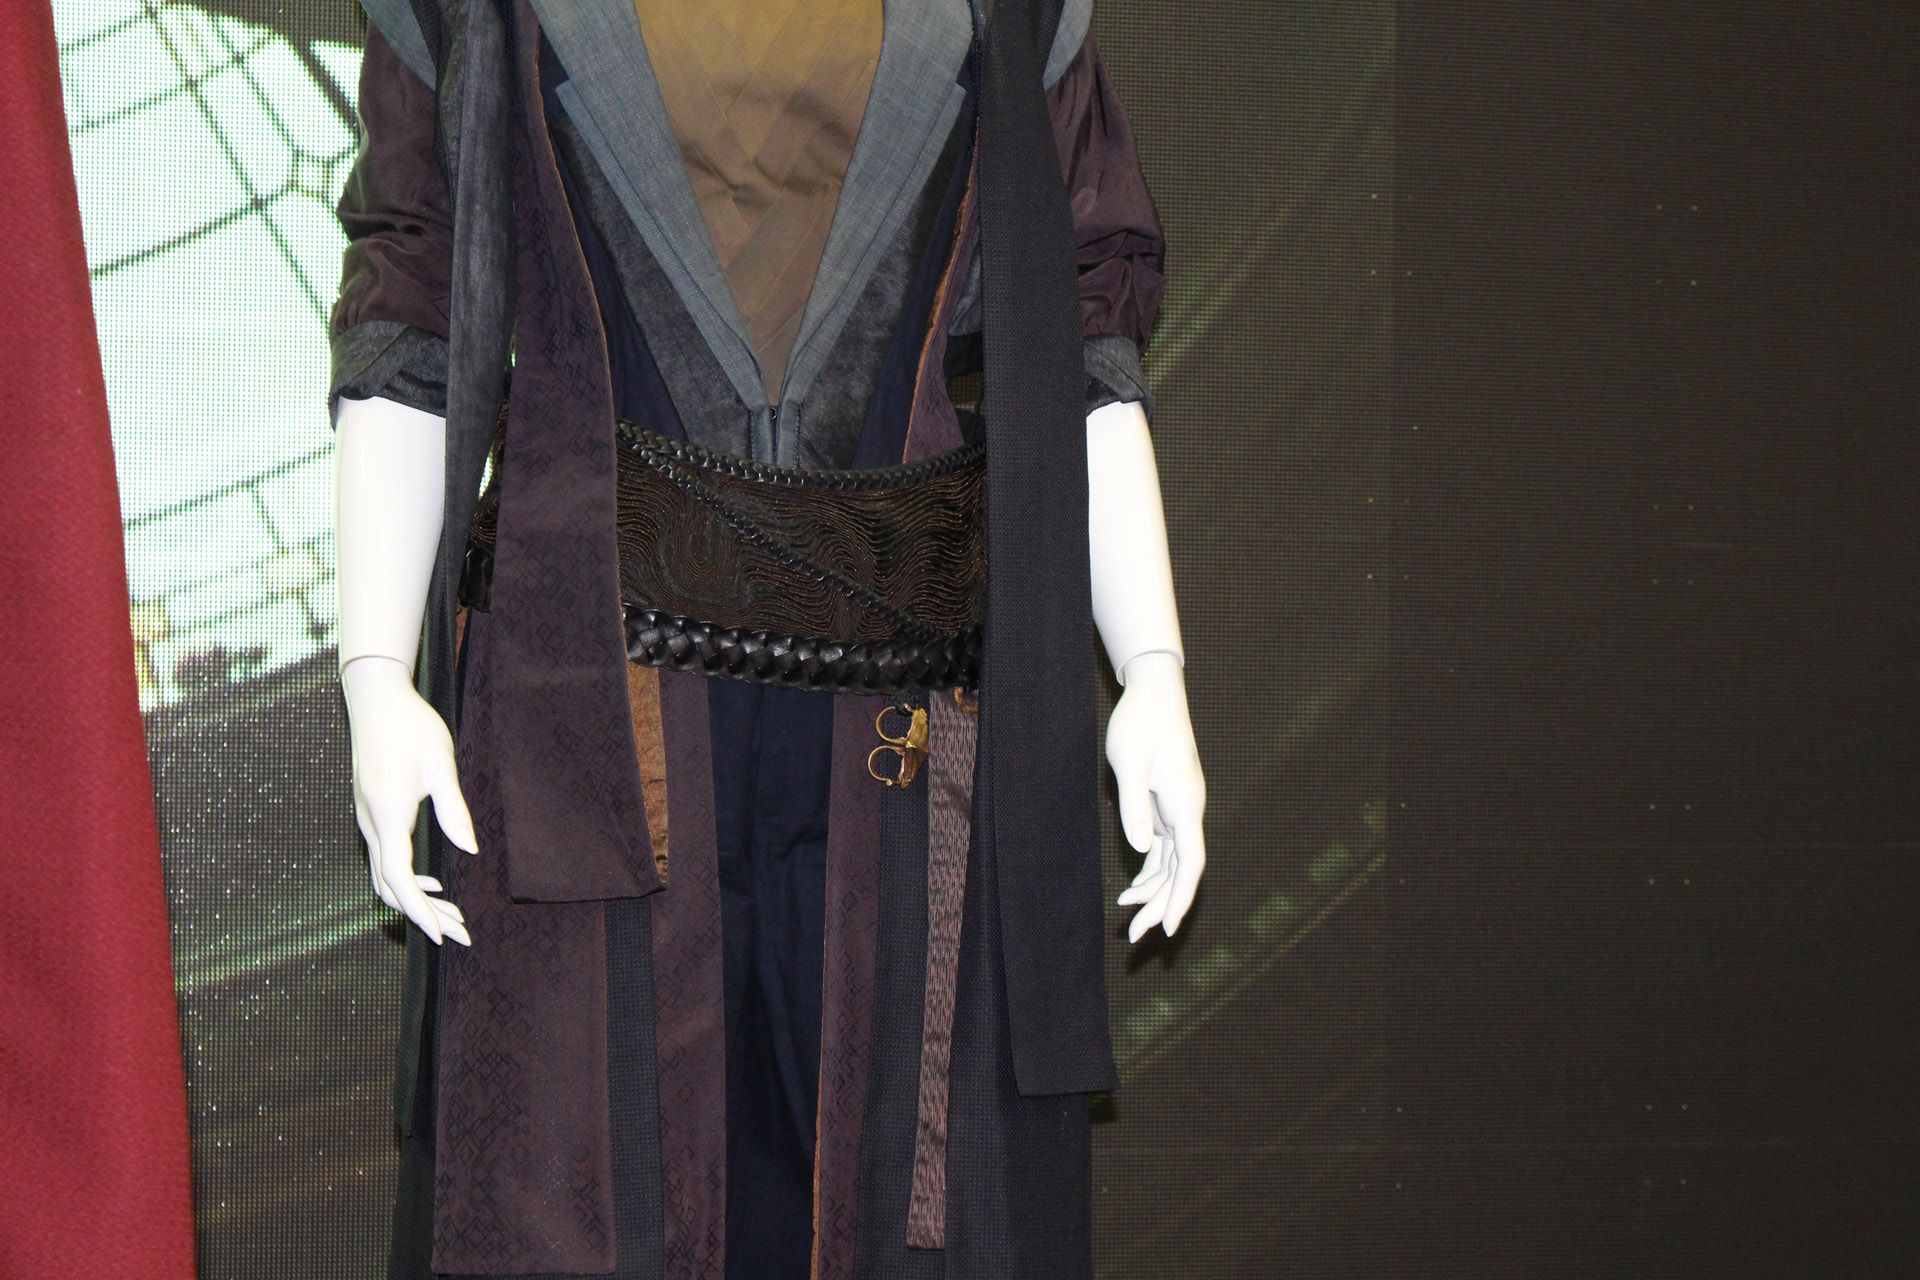 SDCC 2016 - The Ancient One Costume - Sling Ring